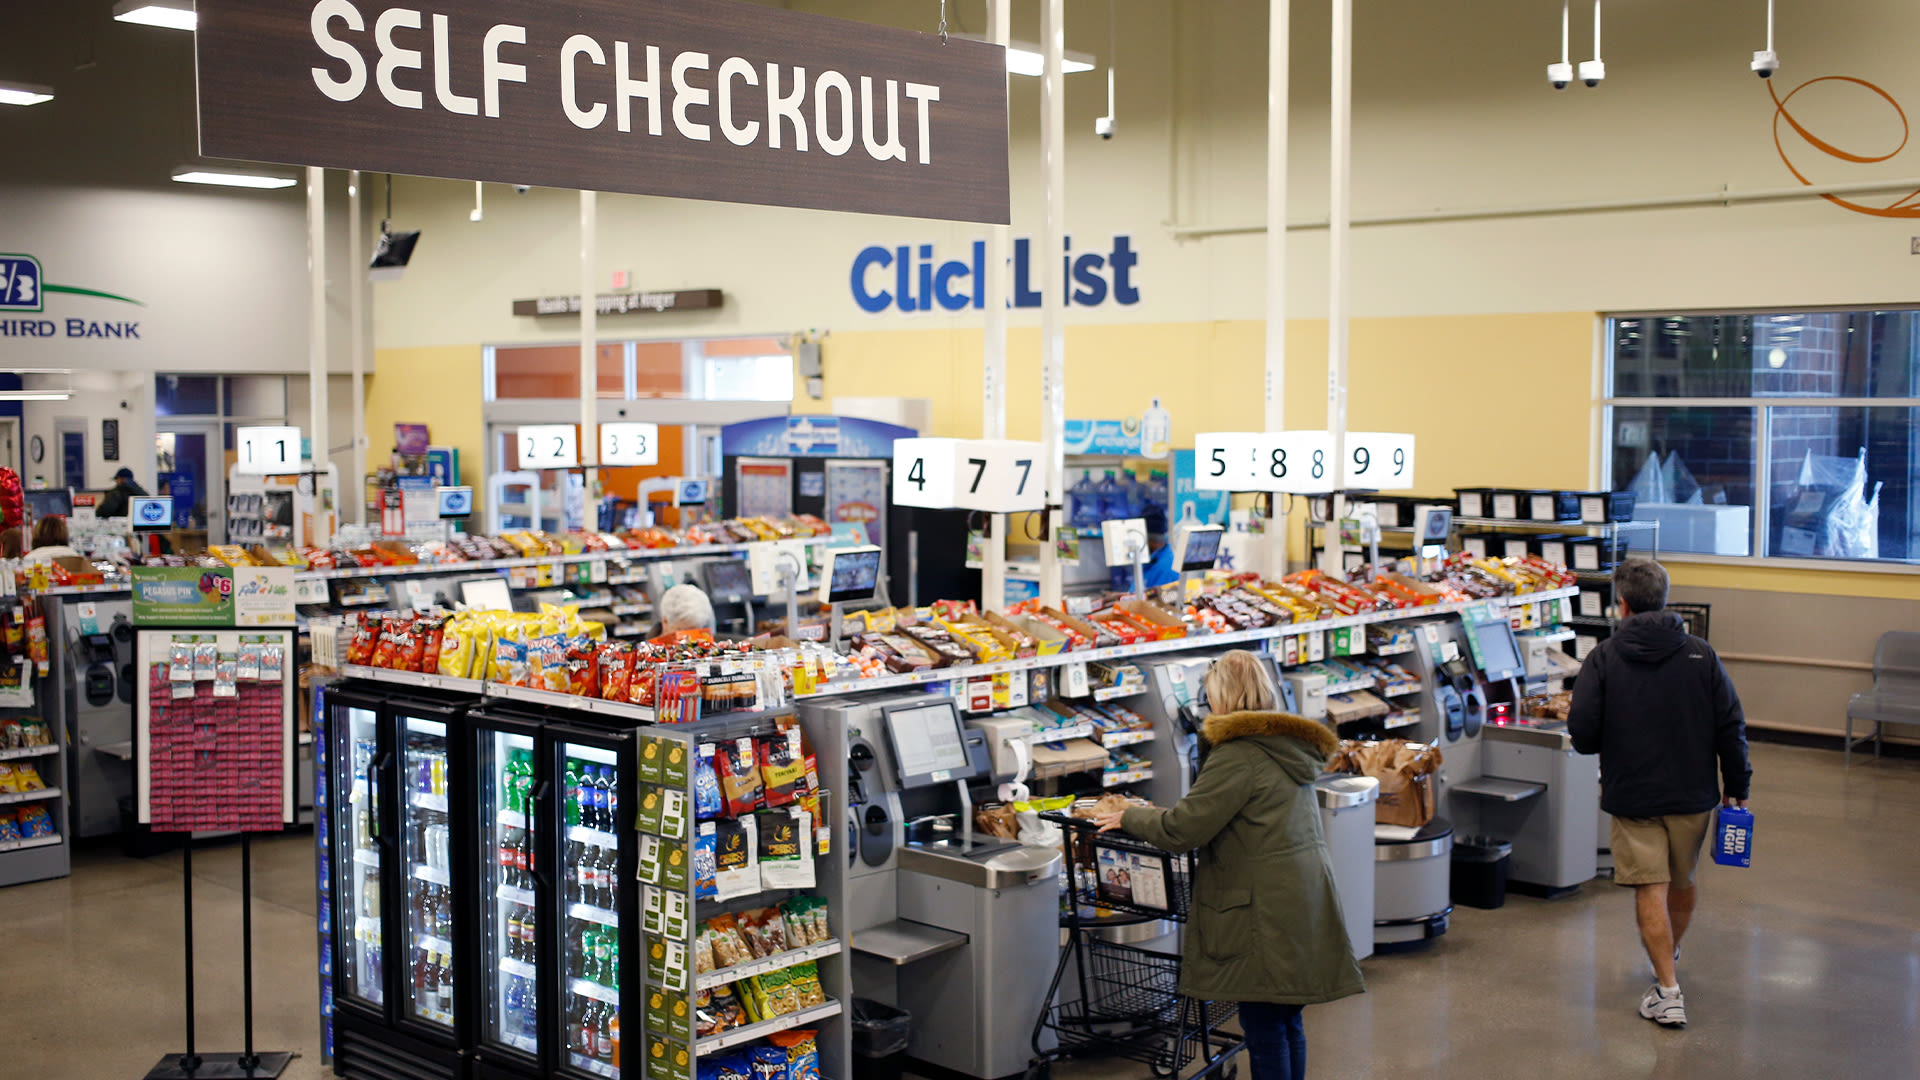 'Unacceptable,' fumes Kroger shopper after getting no help due to self-checkout